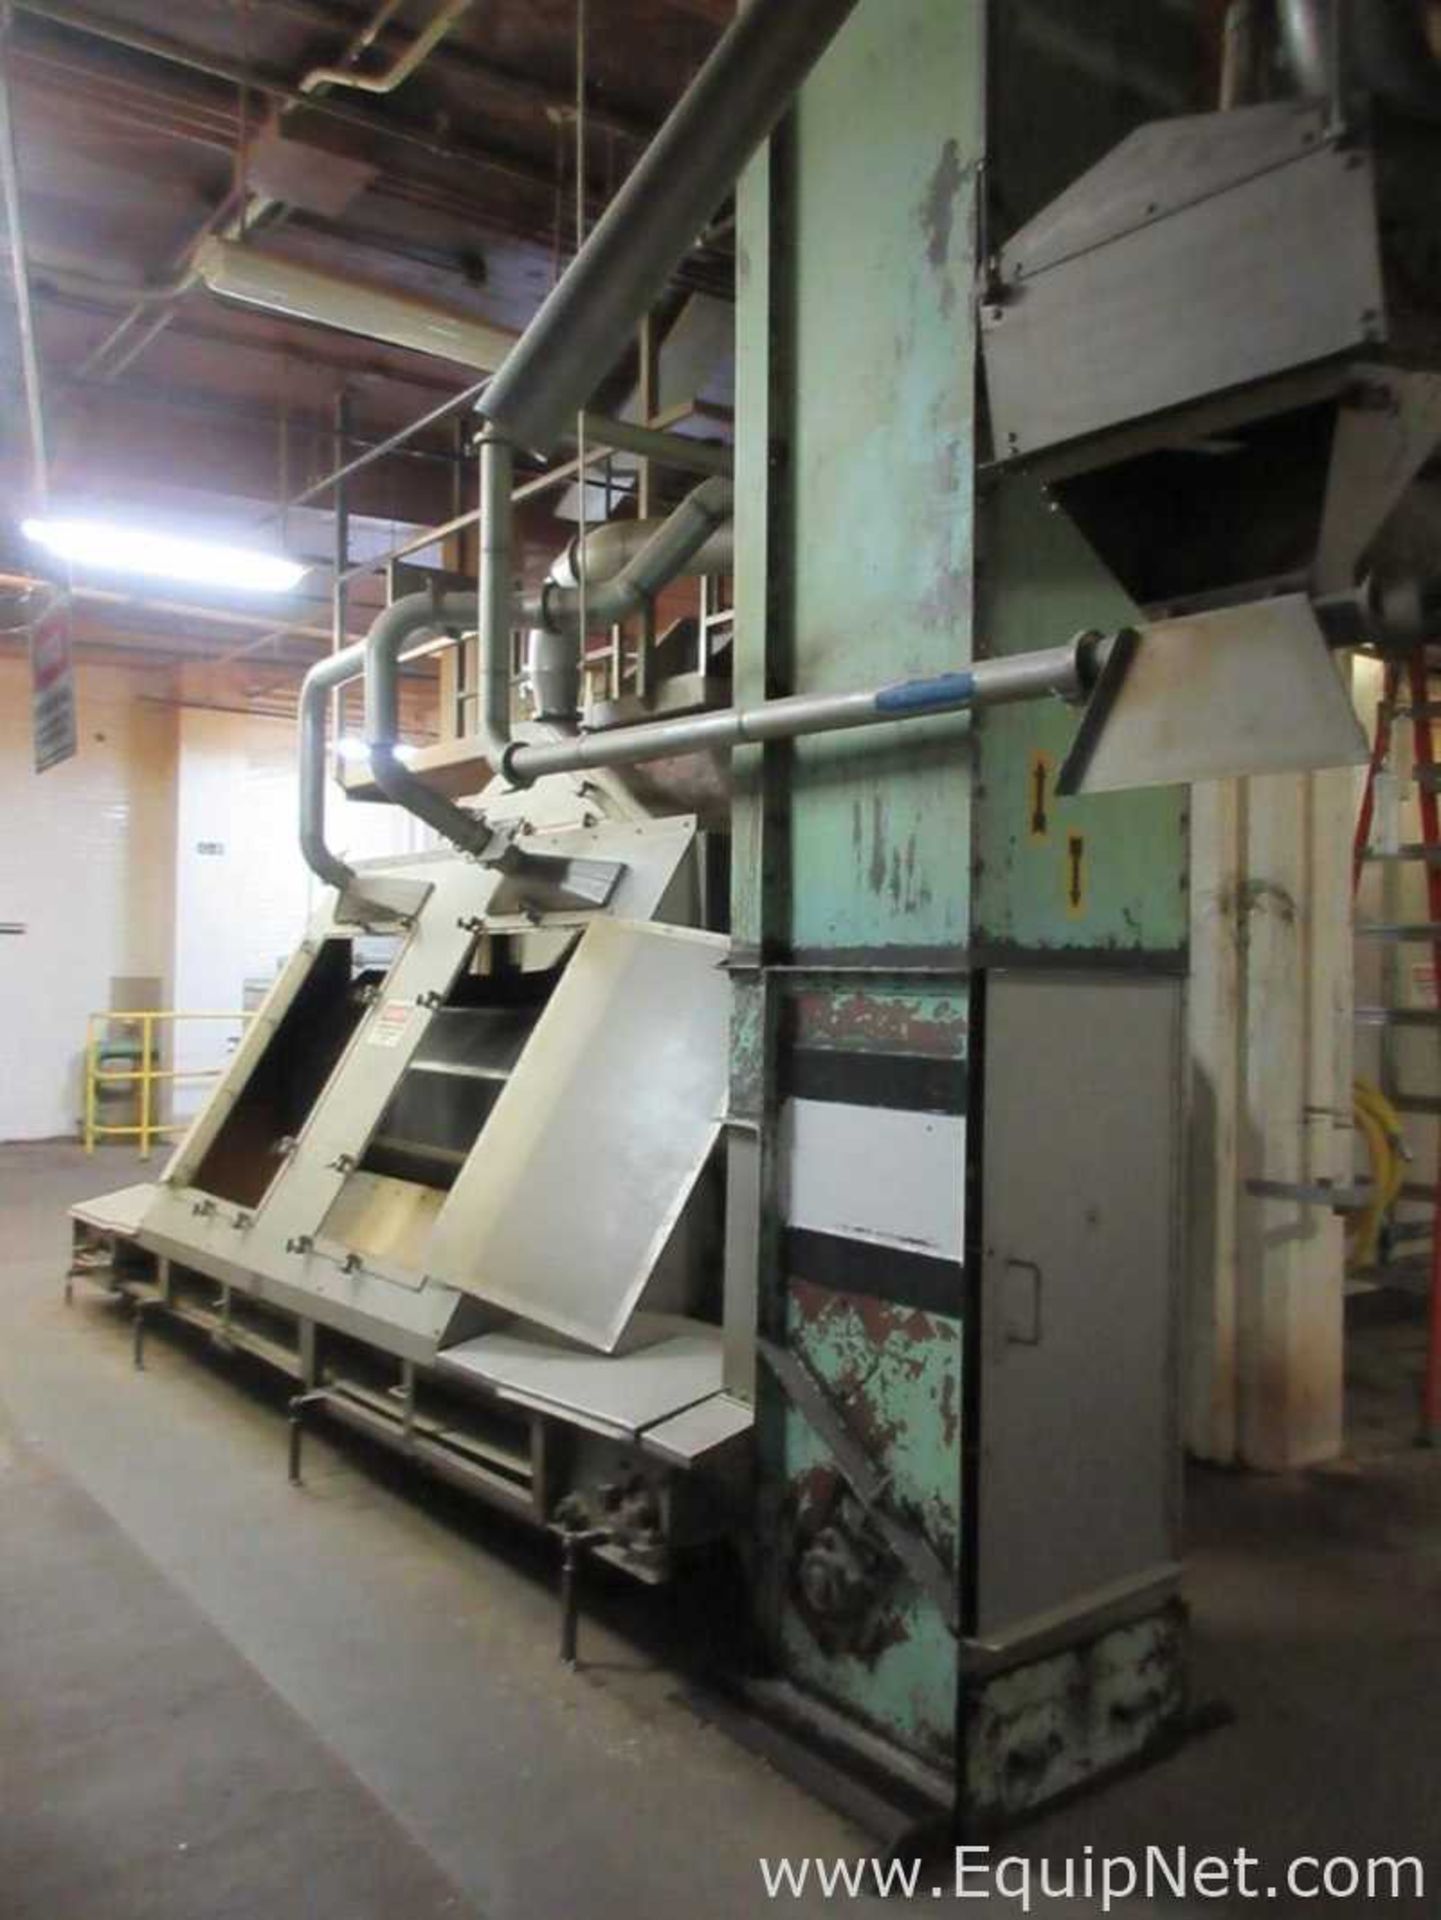 EQUIPNET LISTING #597061; REMOVAL COST: $0; DESCRIPTION: National Drying Machinery Belt - Image 7 of 27